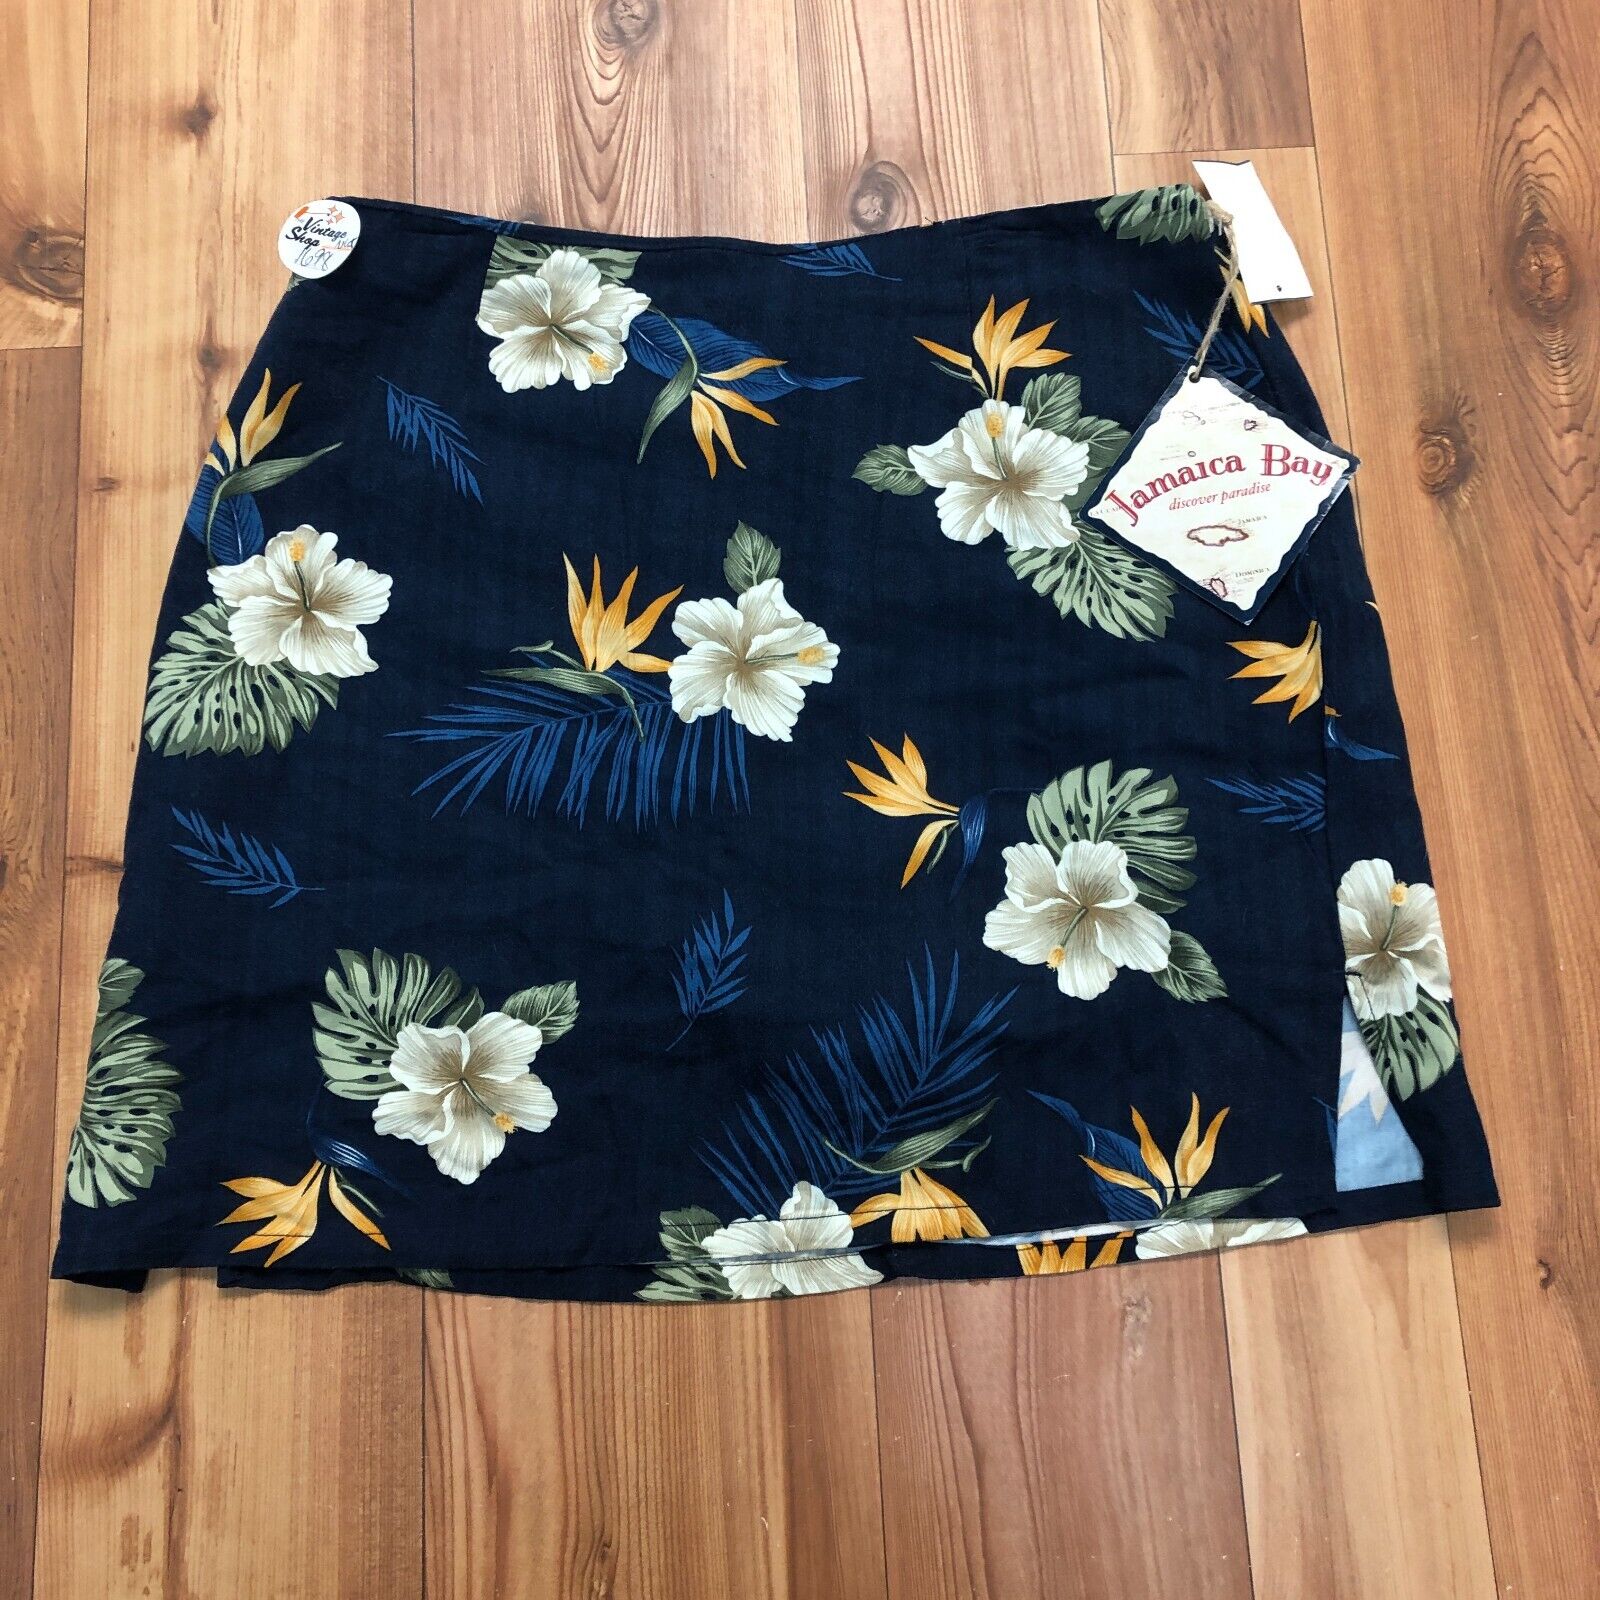 New Jamaica Bay Blue Floral Rayon Flat Front Mini Skirt Women's Size 16